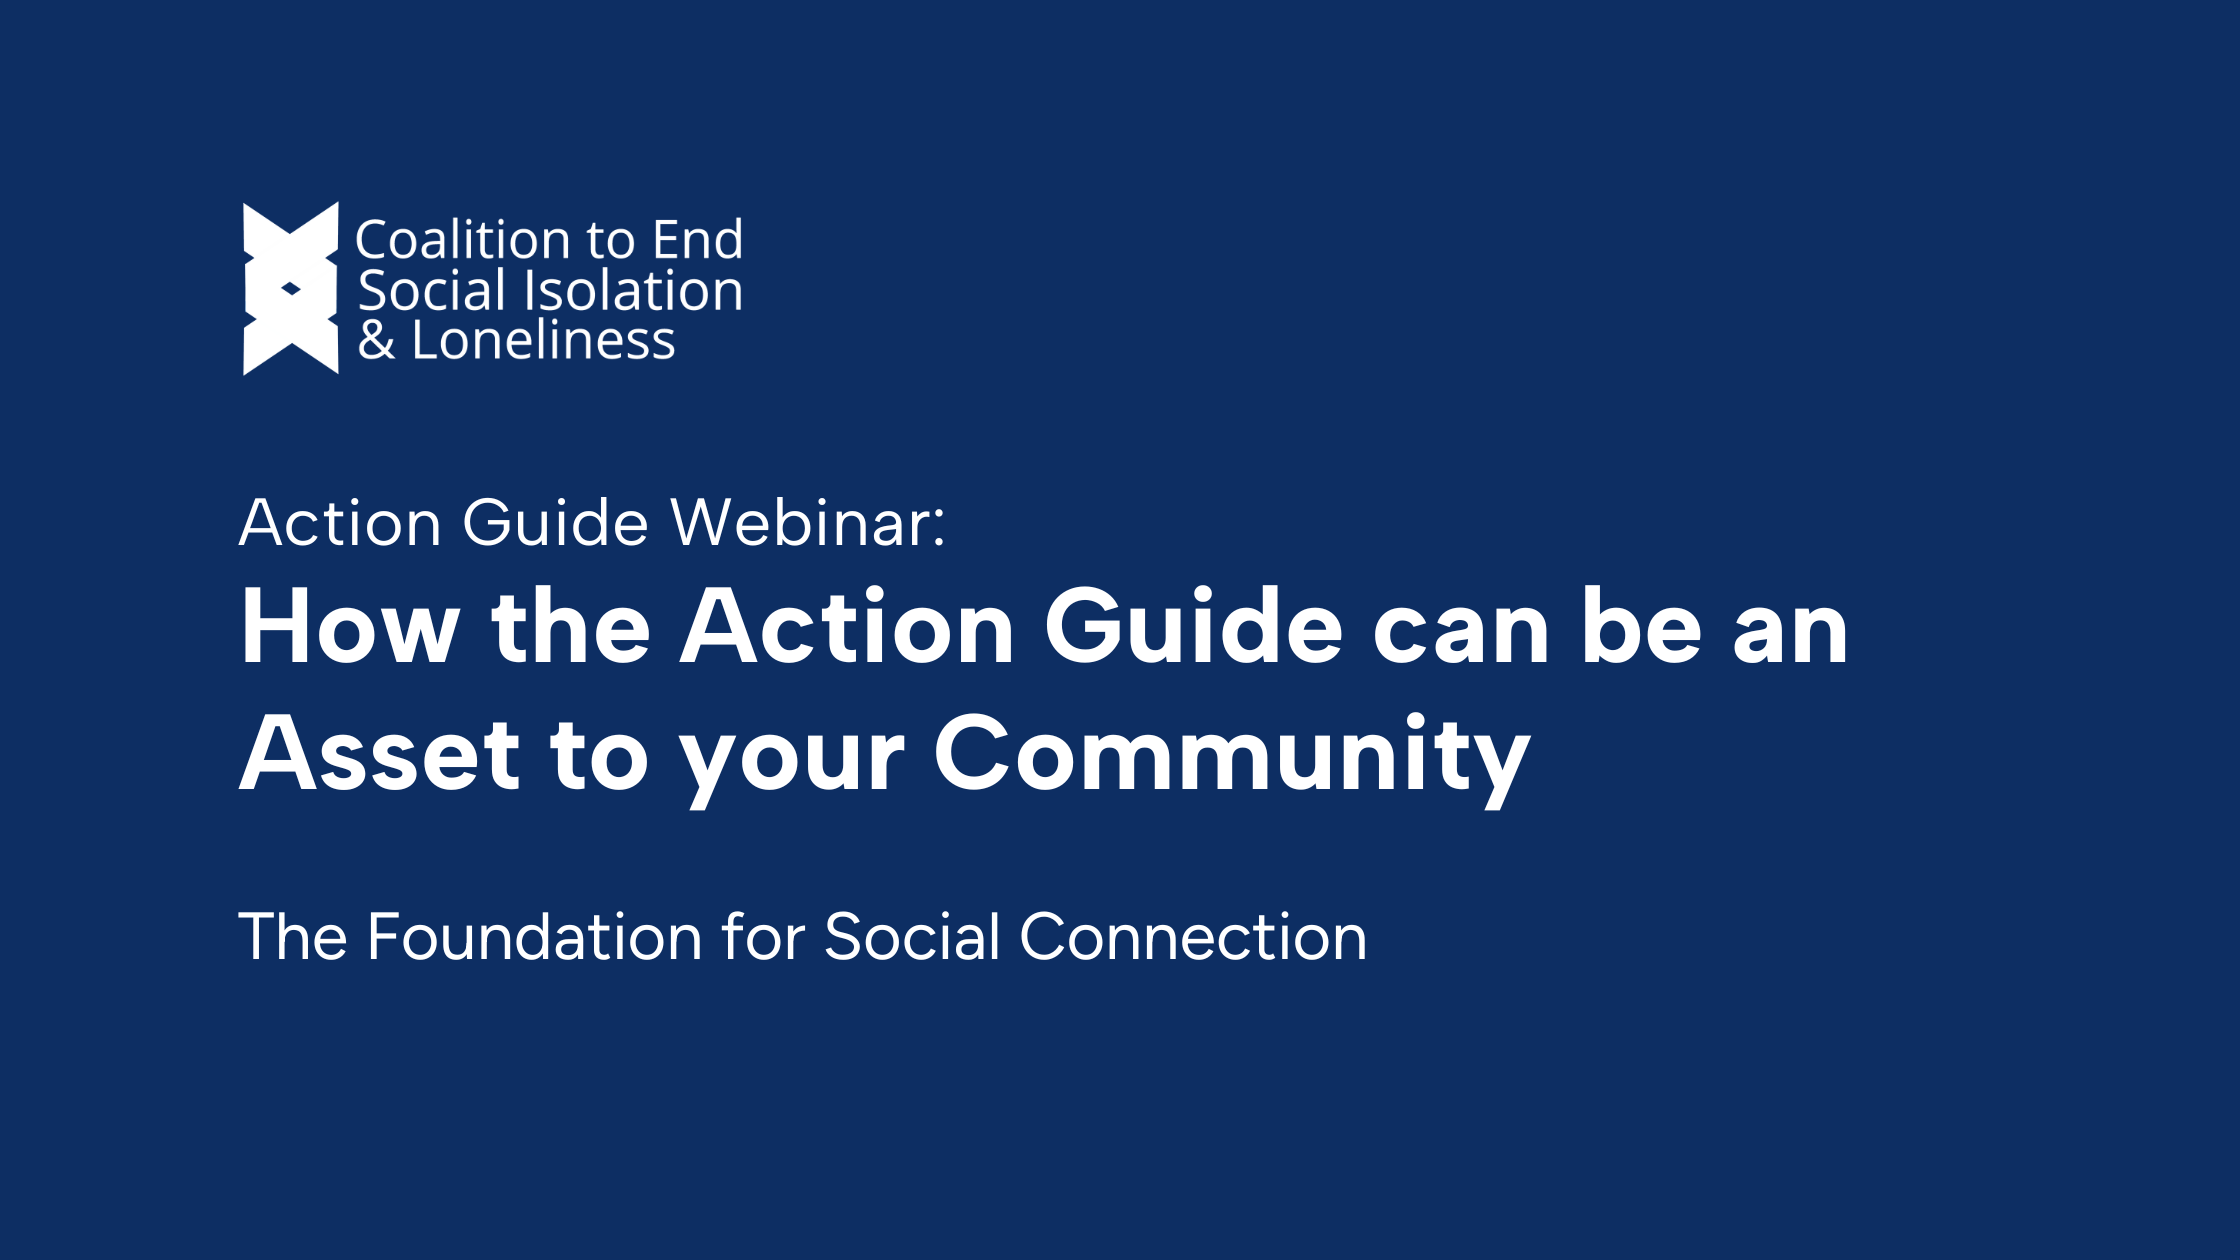 How the Action Guide can be an Asset in your Community